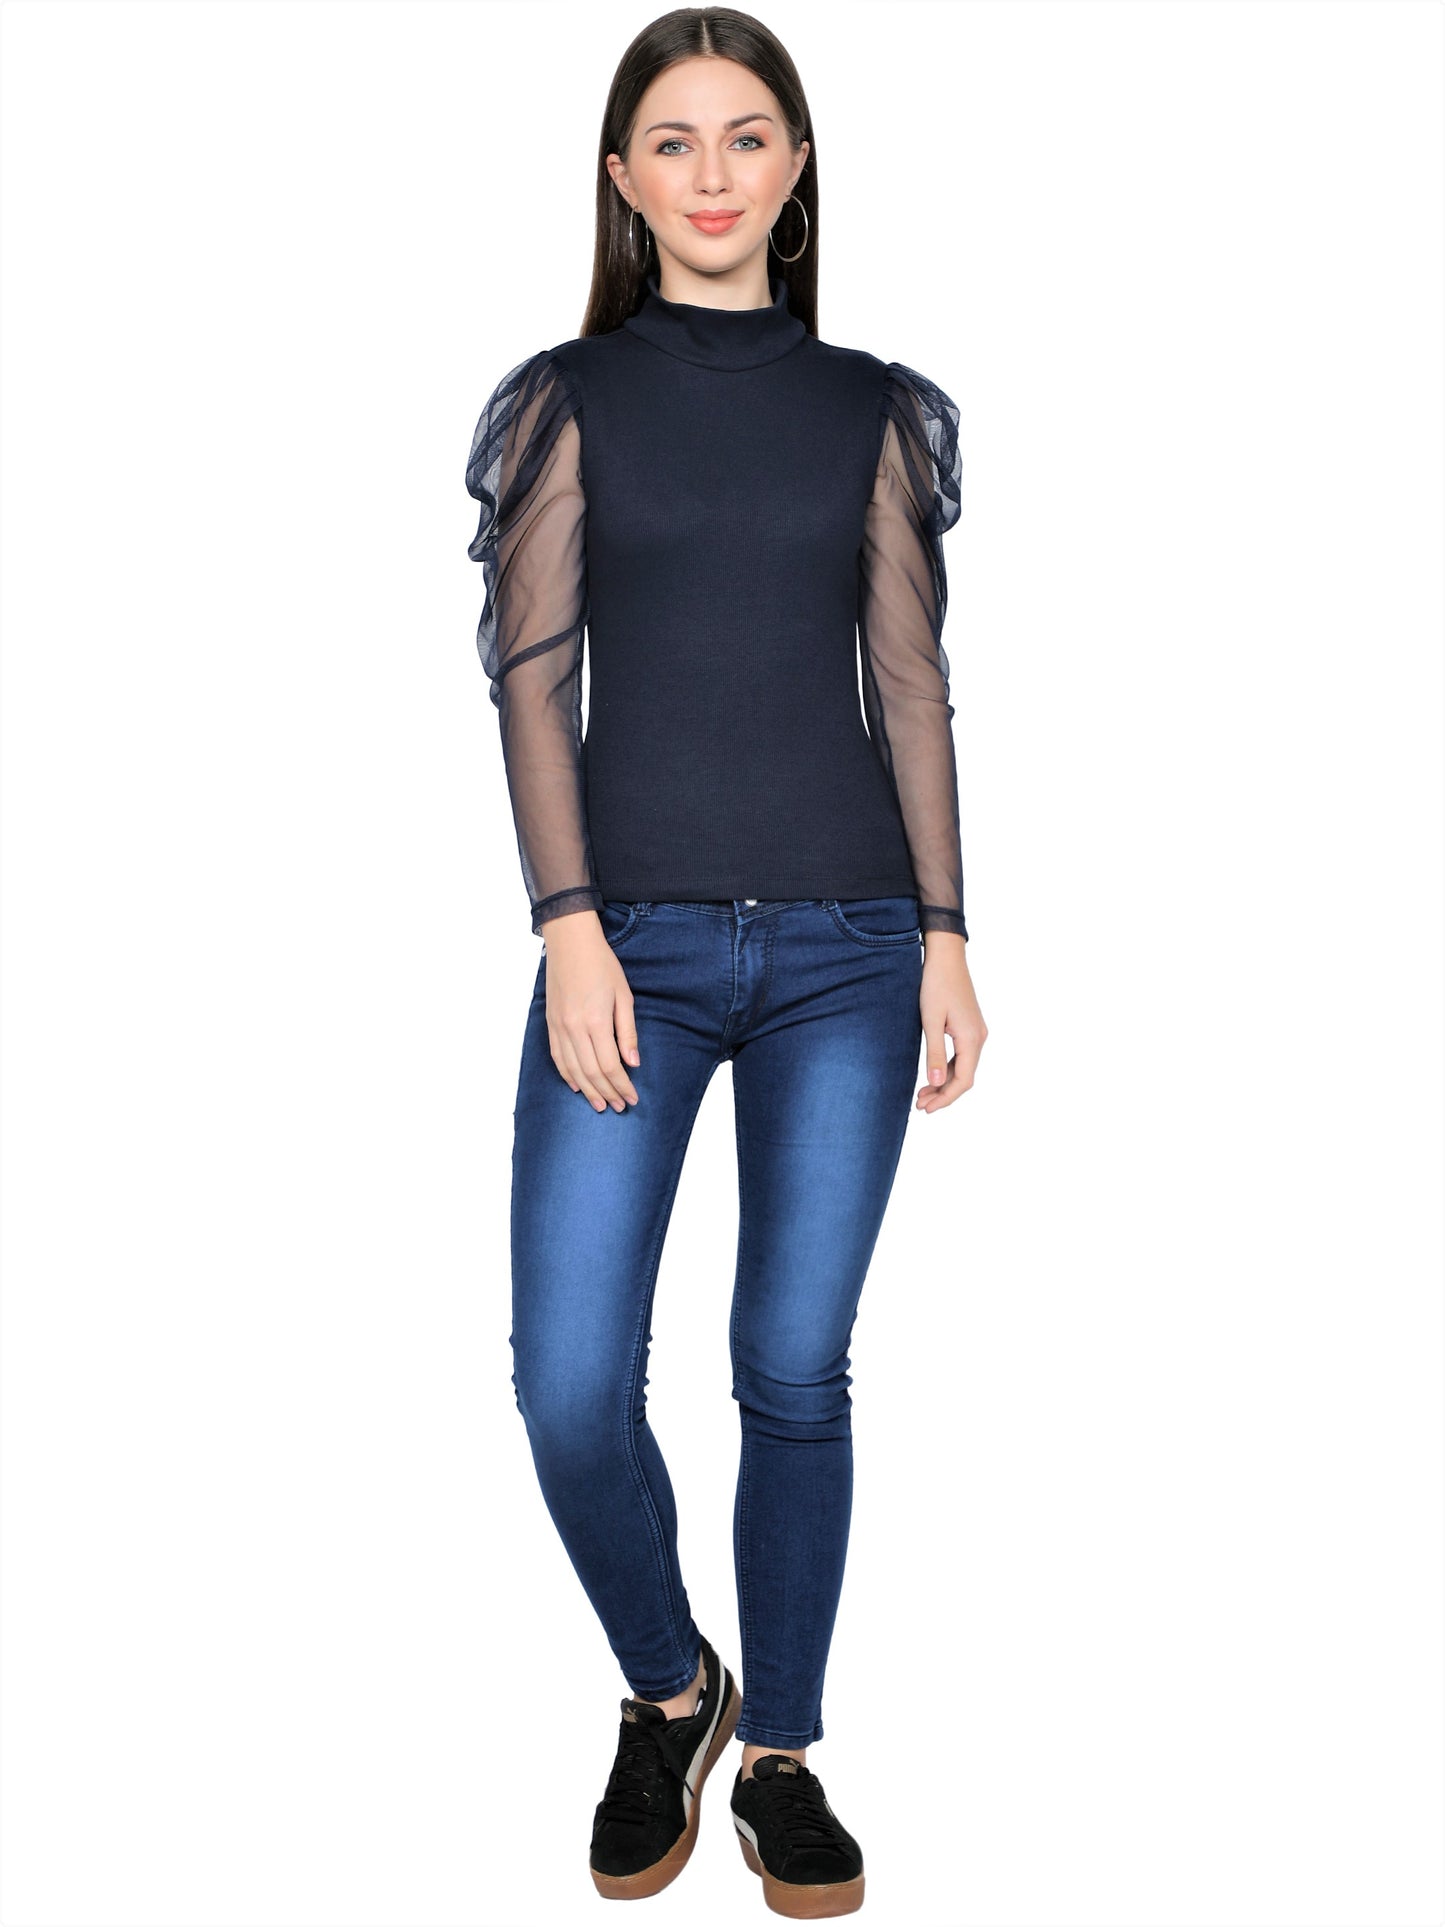 Women Roll-Up with Net Sleeves Ribbed Solid Navy Blue High Neck Tops Turtle Neck Top for Women